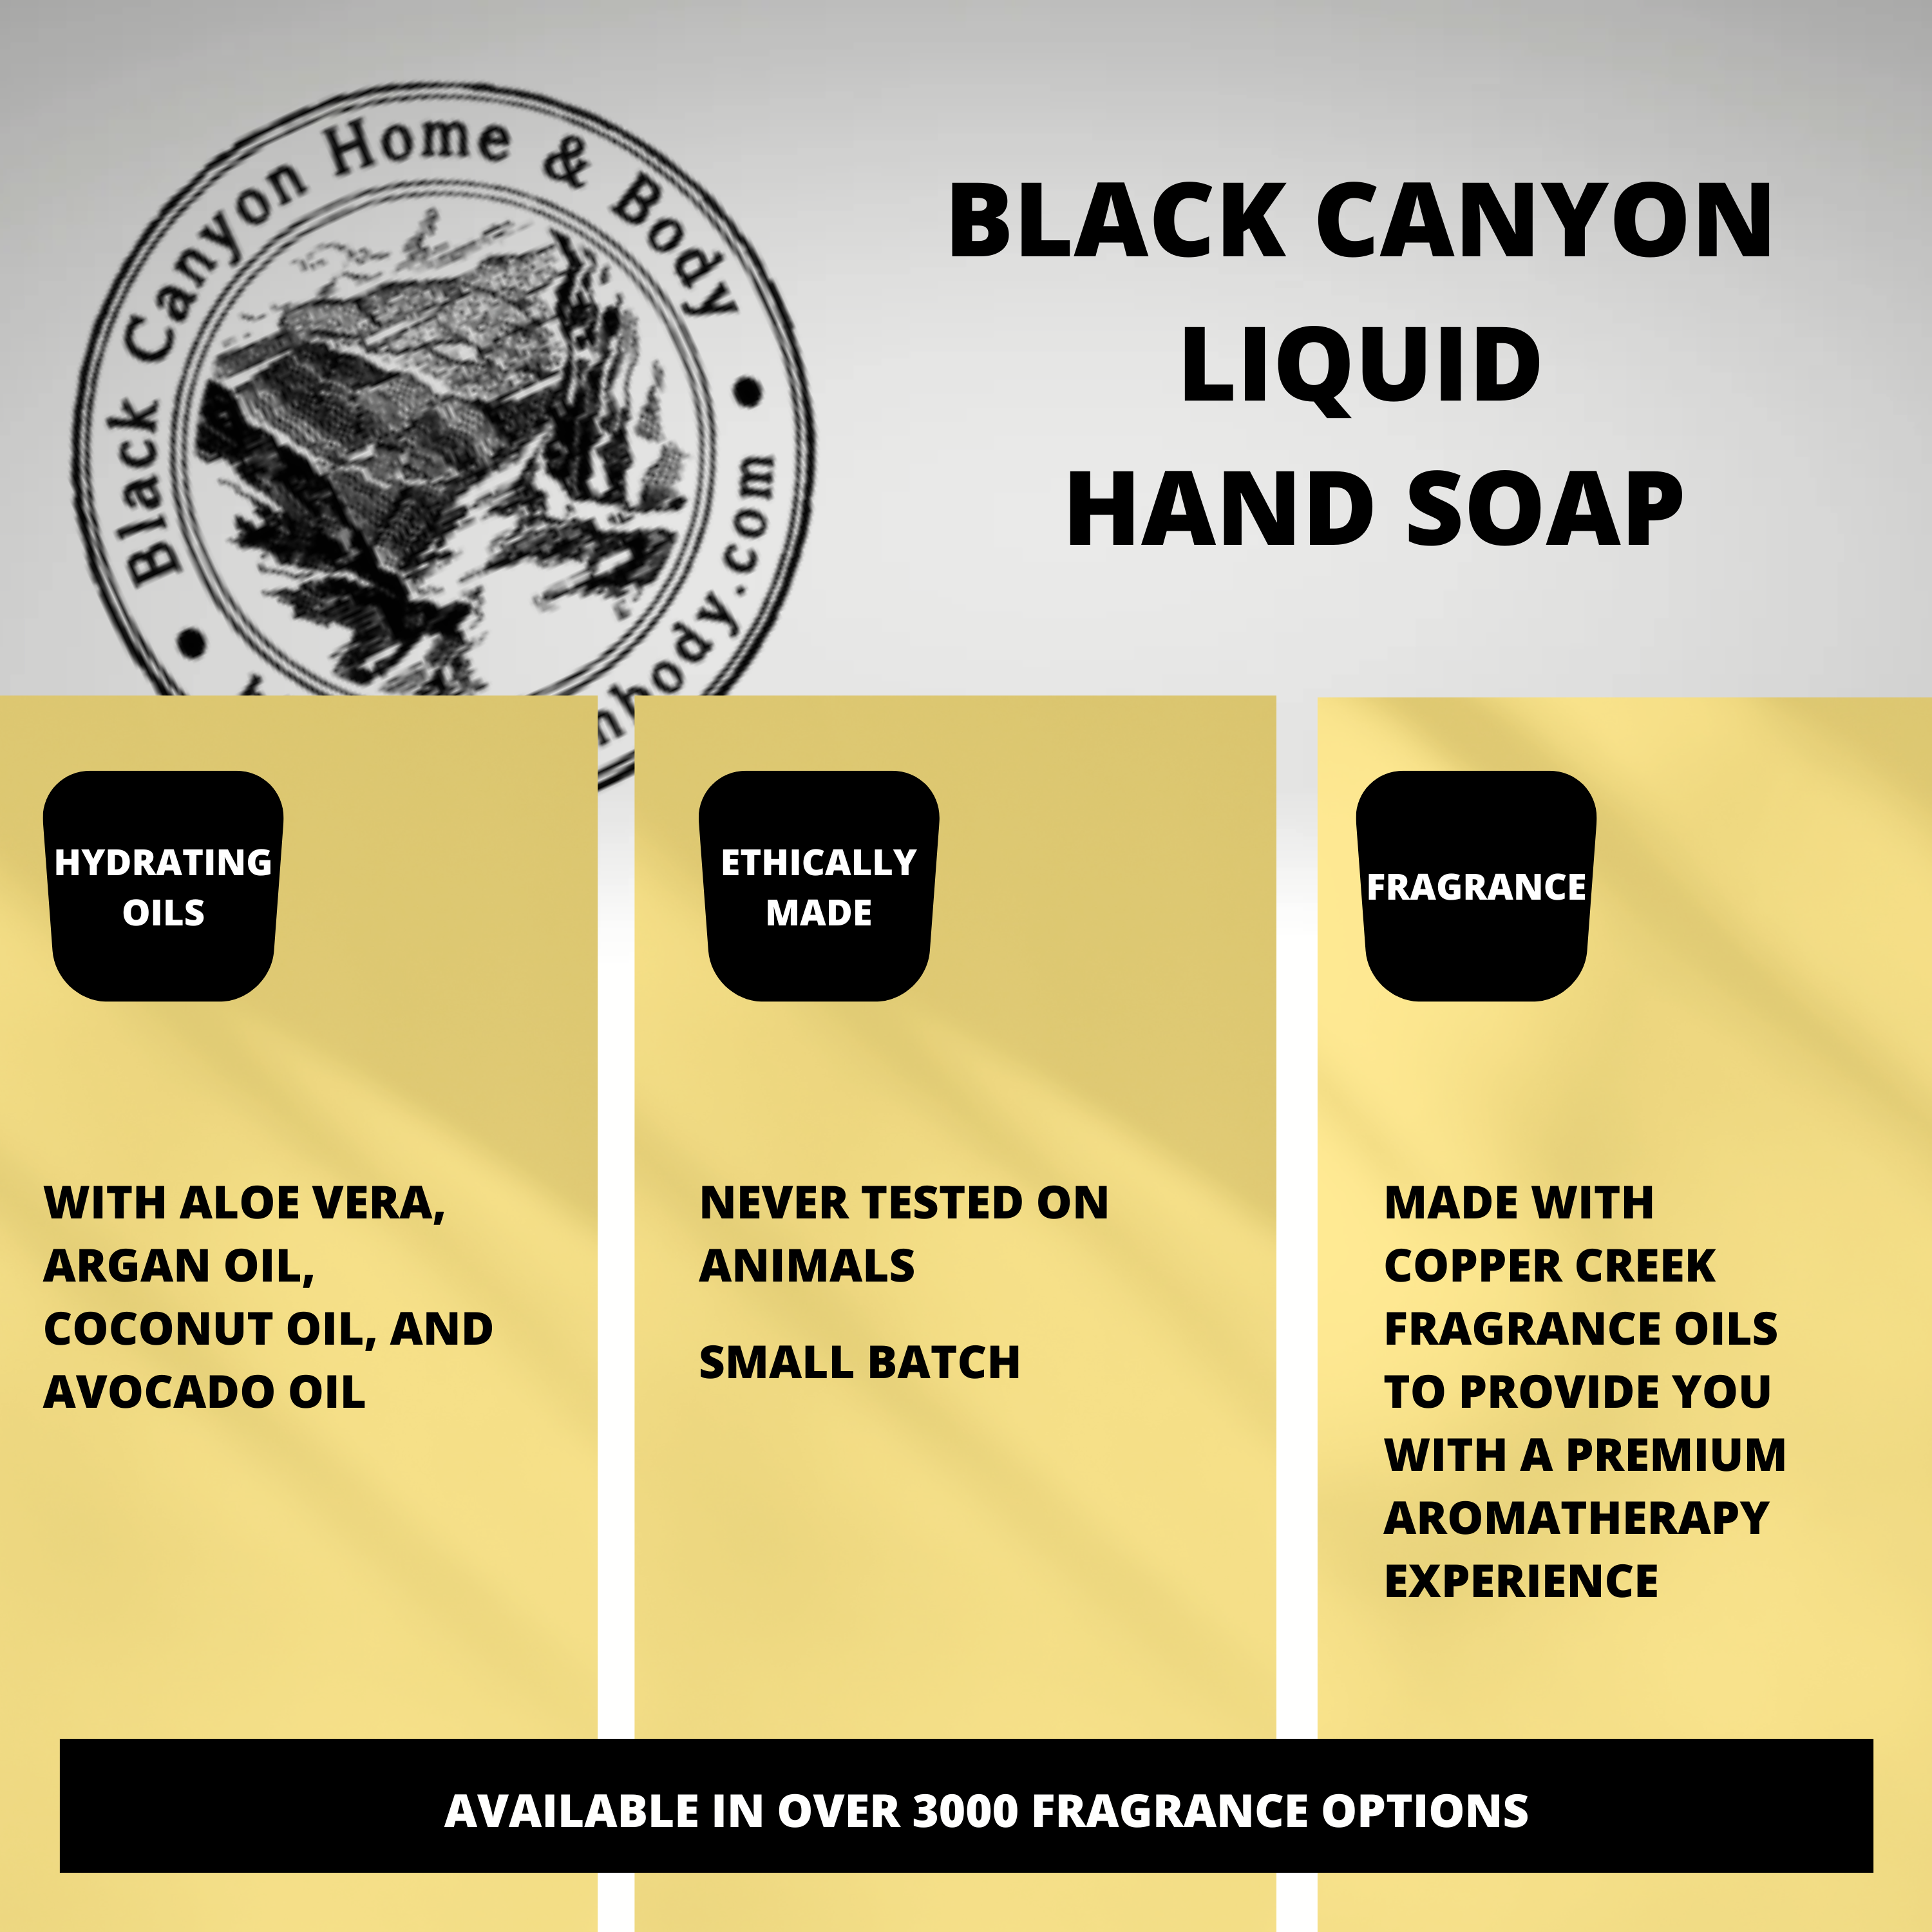 Black Canyon Monkey Farts Scented Liquid Hand Soap